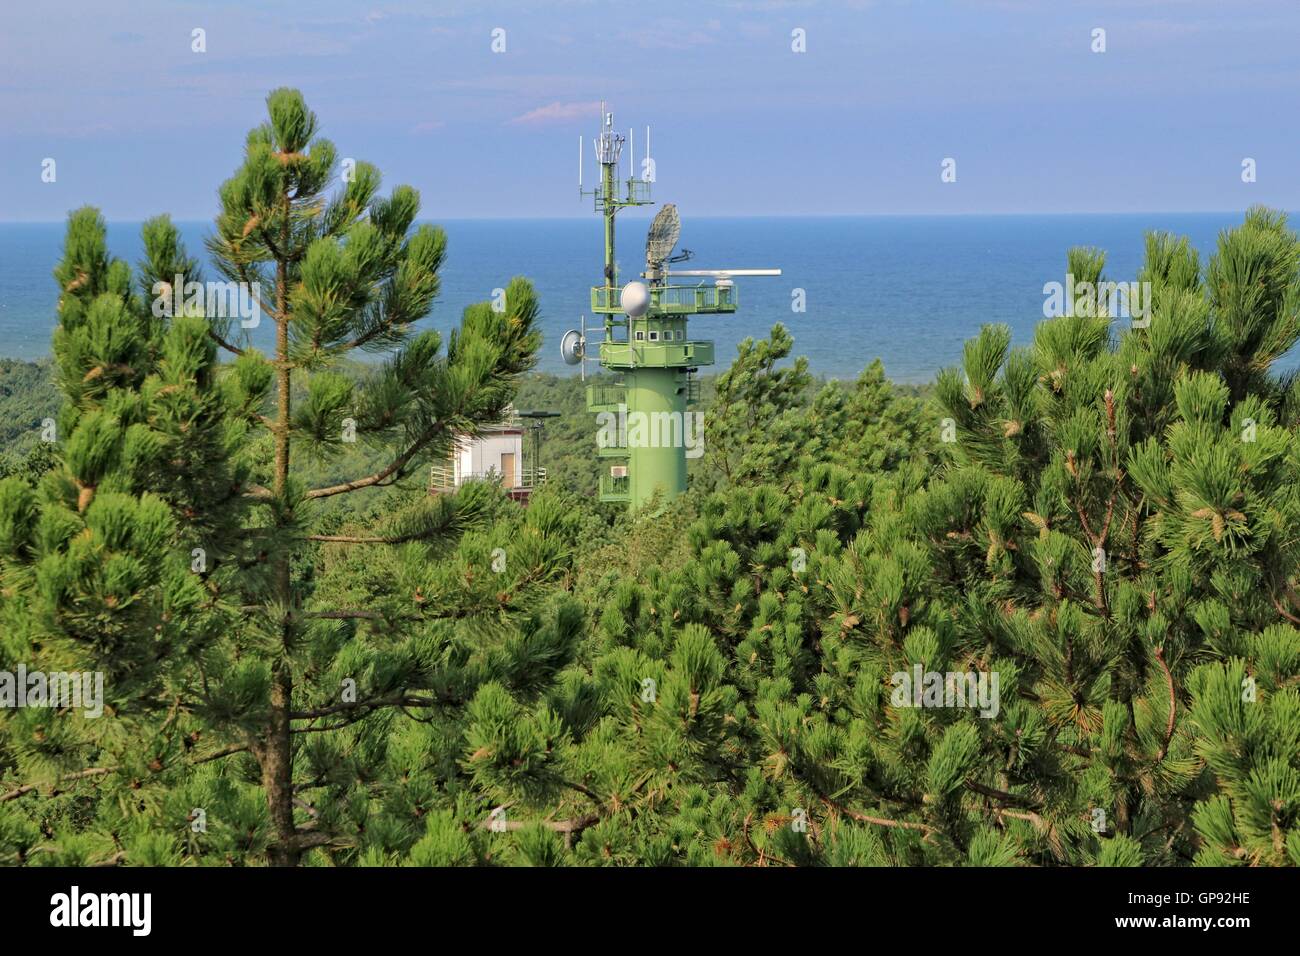 Czolpino, Poland 3rd, Sept. 2016 Sunny and warm day in Czolpino in the Slowinski National Park. people enjoy good weather walking at the Baltic Sea beach and the mooving sand dunes, and visiting the Czolpino lighthouse. Military radar installation is seen Credit:  Michal Fludra/Alamy Live News Stock Photo